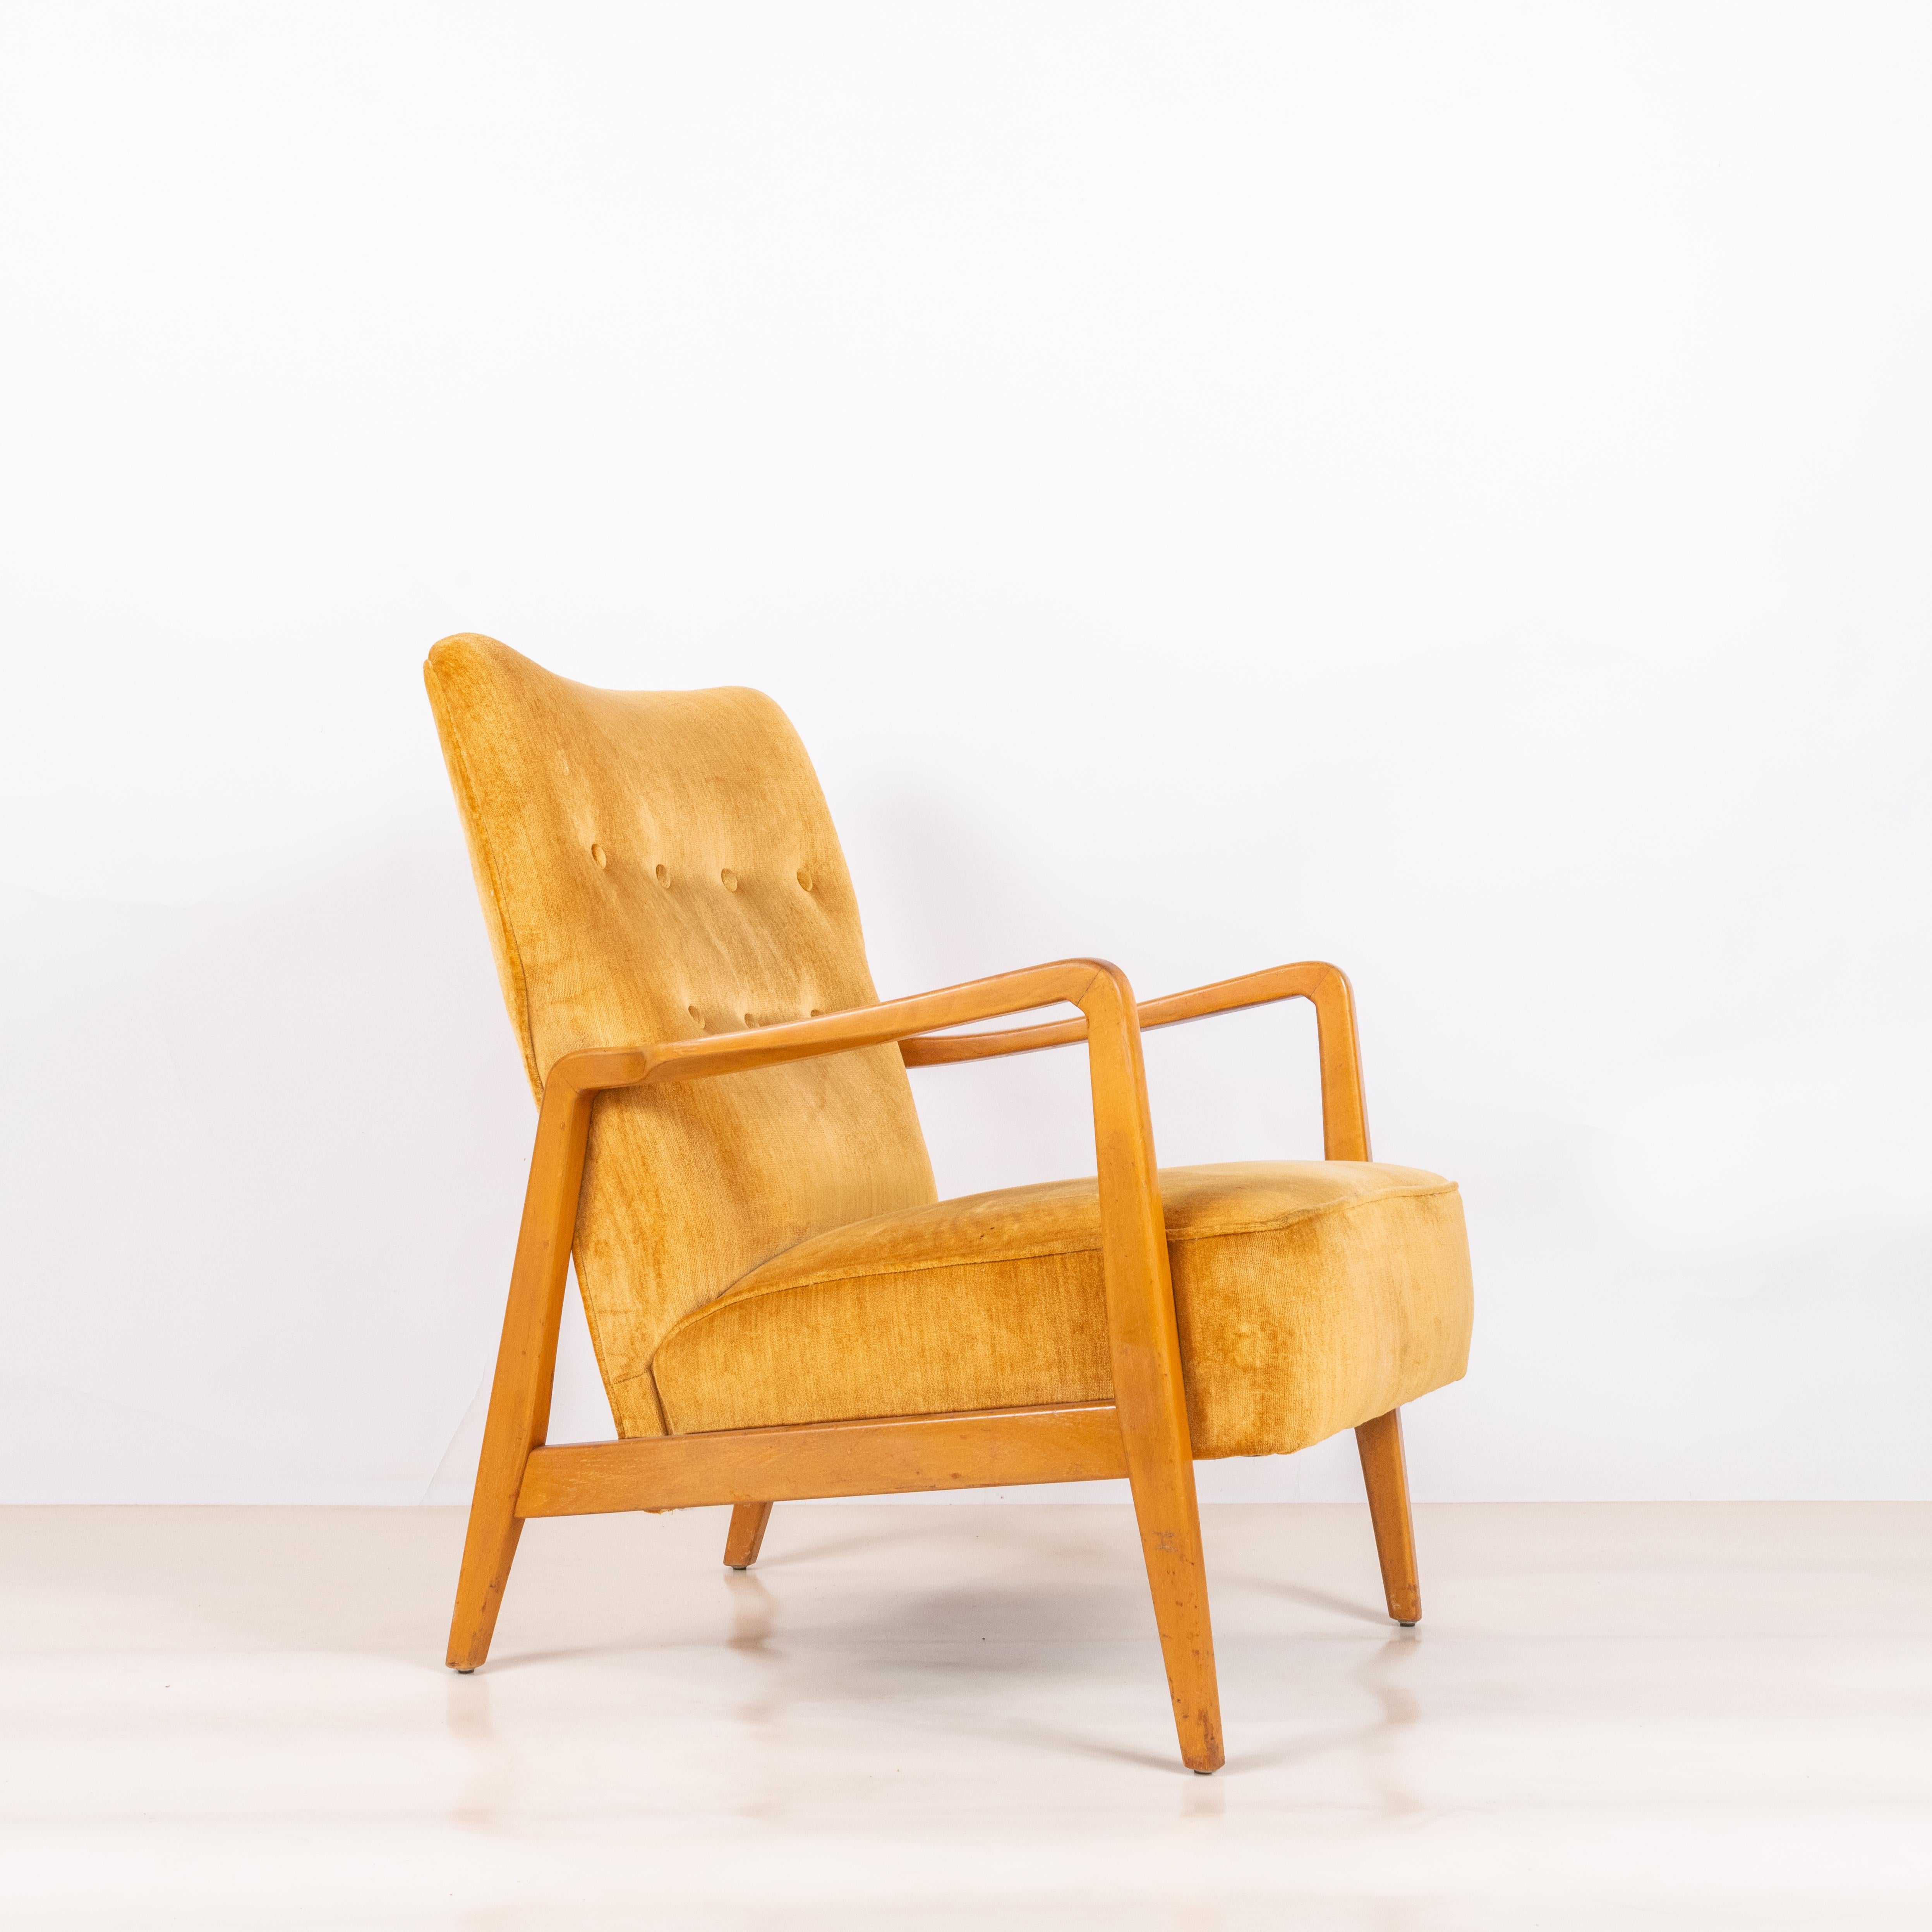 Comfortable yellow velvet American Midcentury armchair in the style of Jens Risom.

